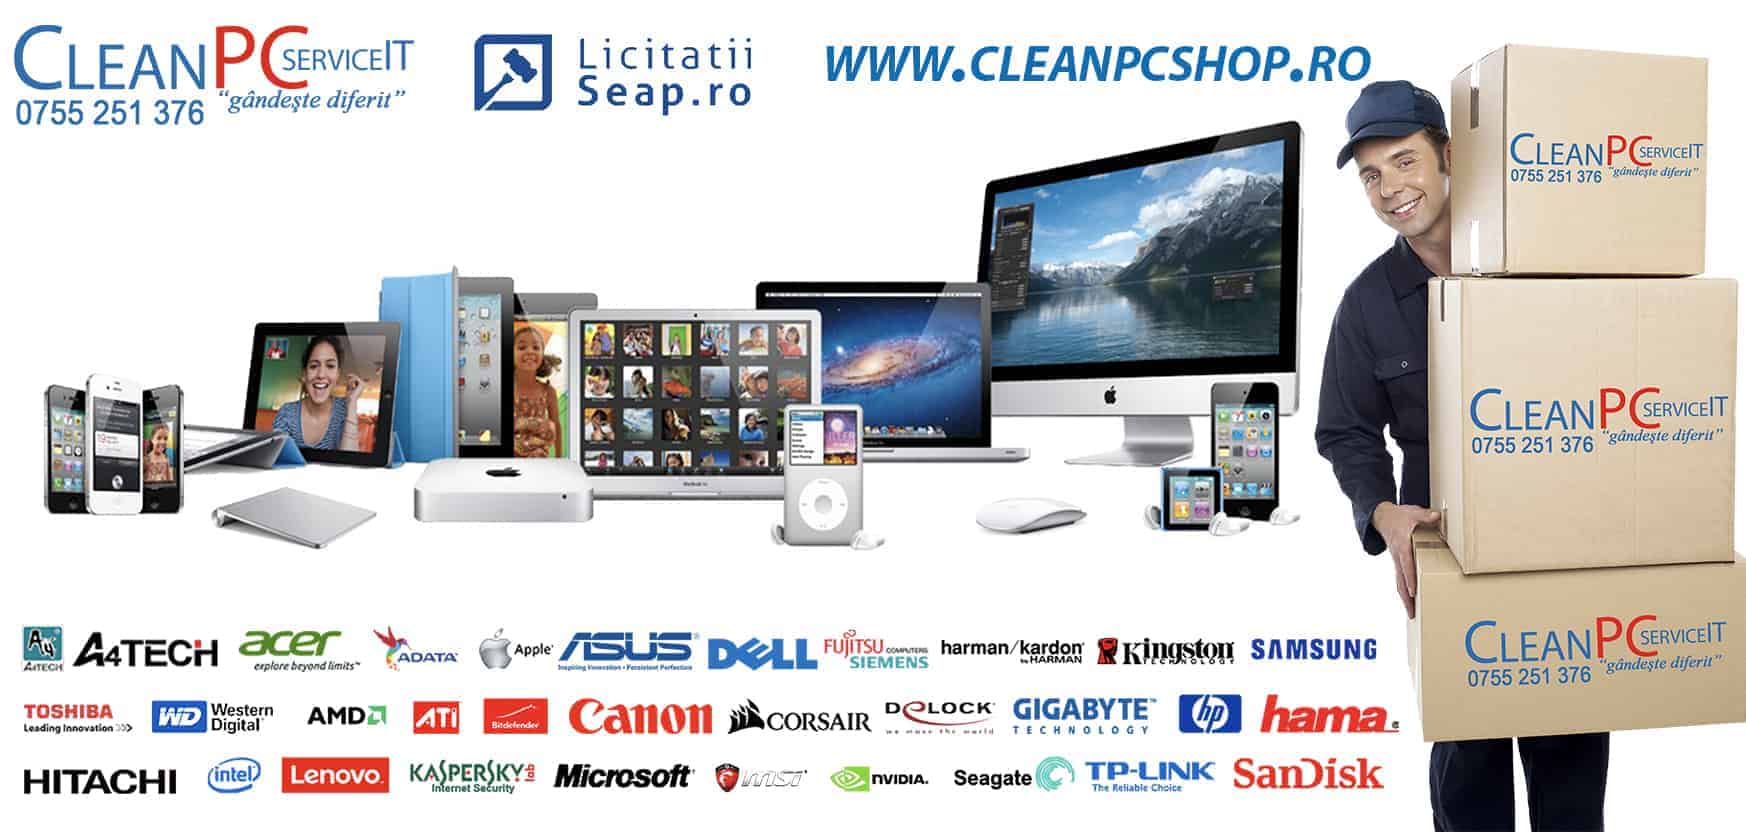 cleanpcshop.ro